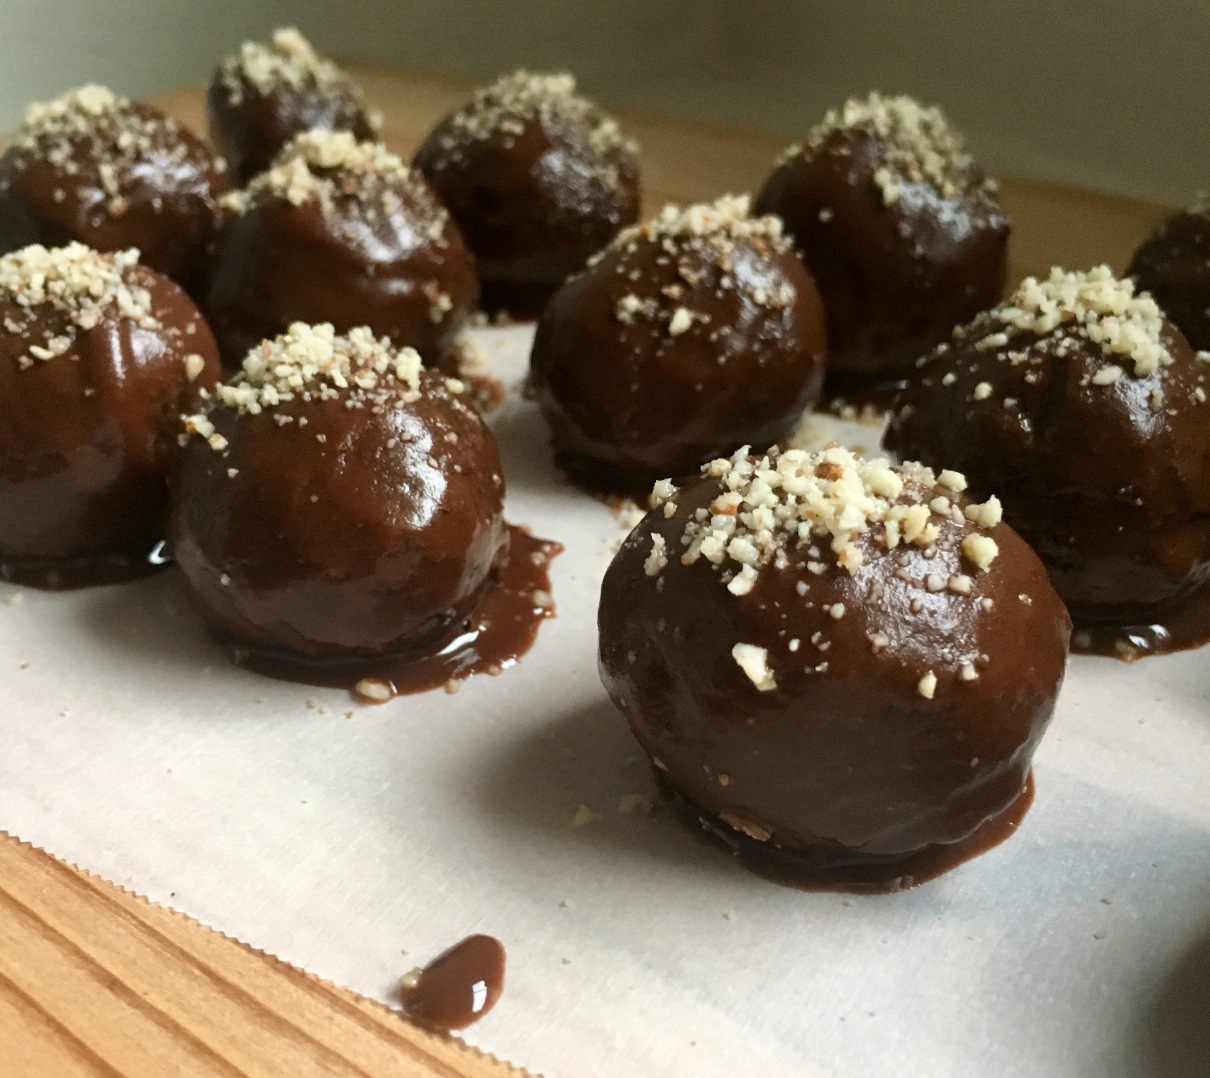 Chocolate truffles with nuts